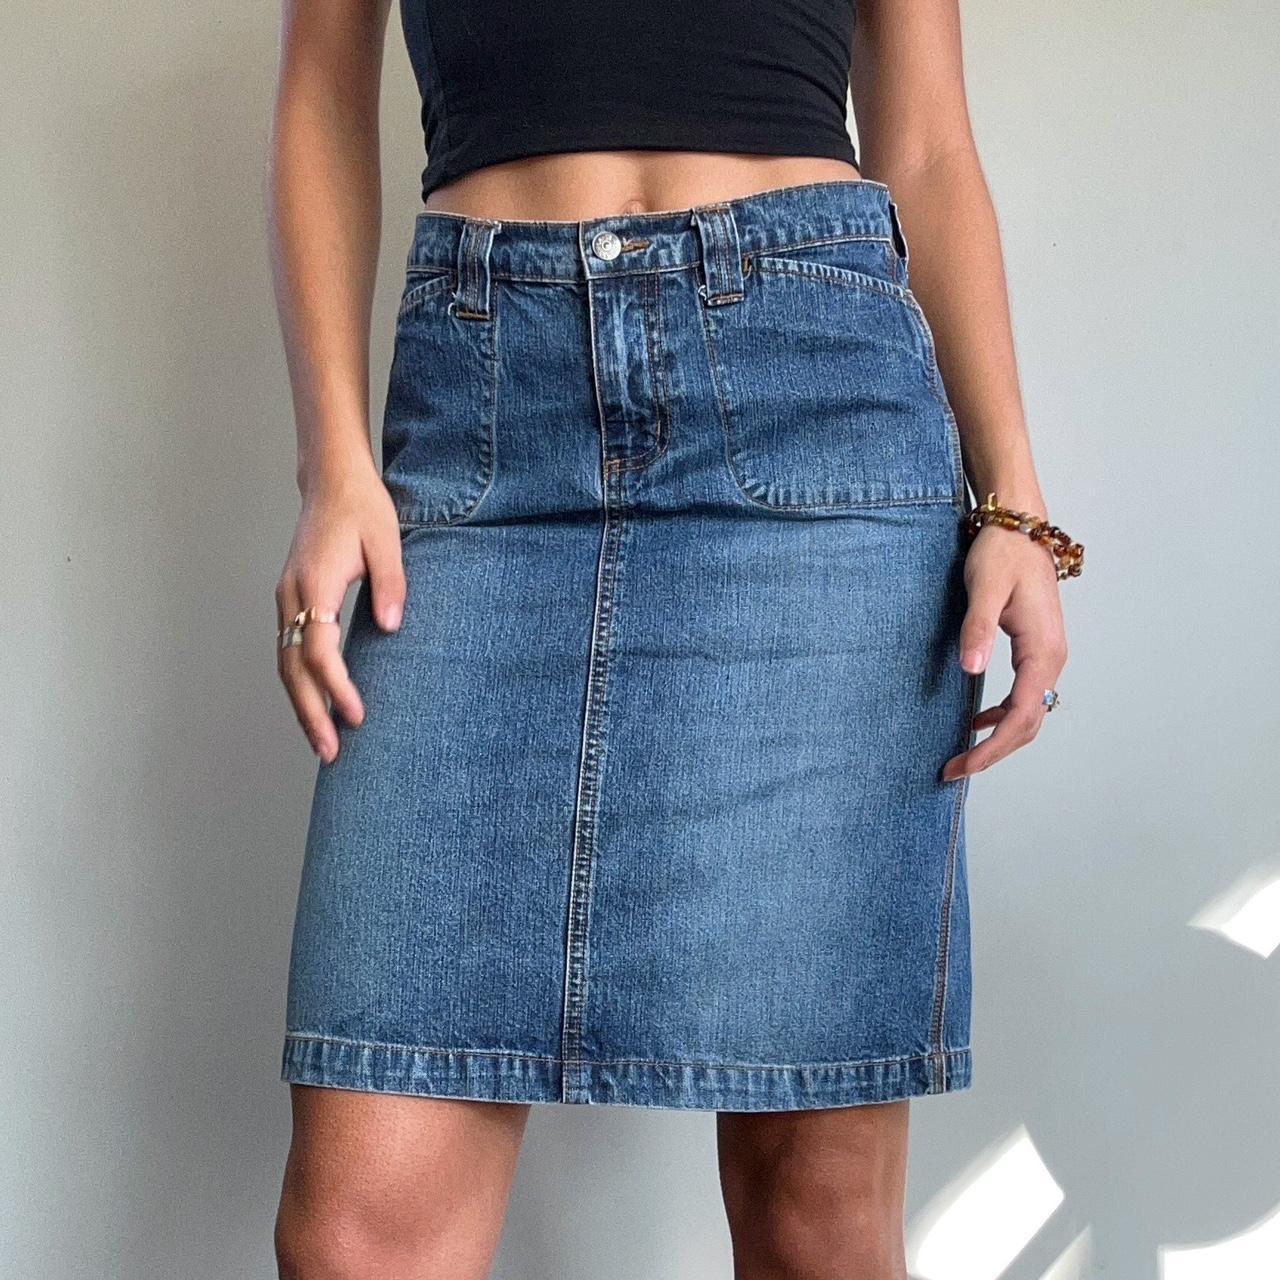 The perfect early 2000s jean midi skirt💙 By the... - Depop